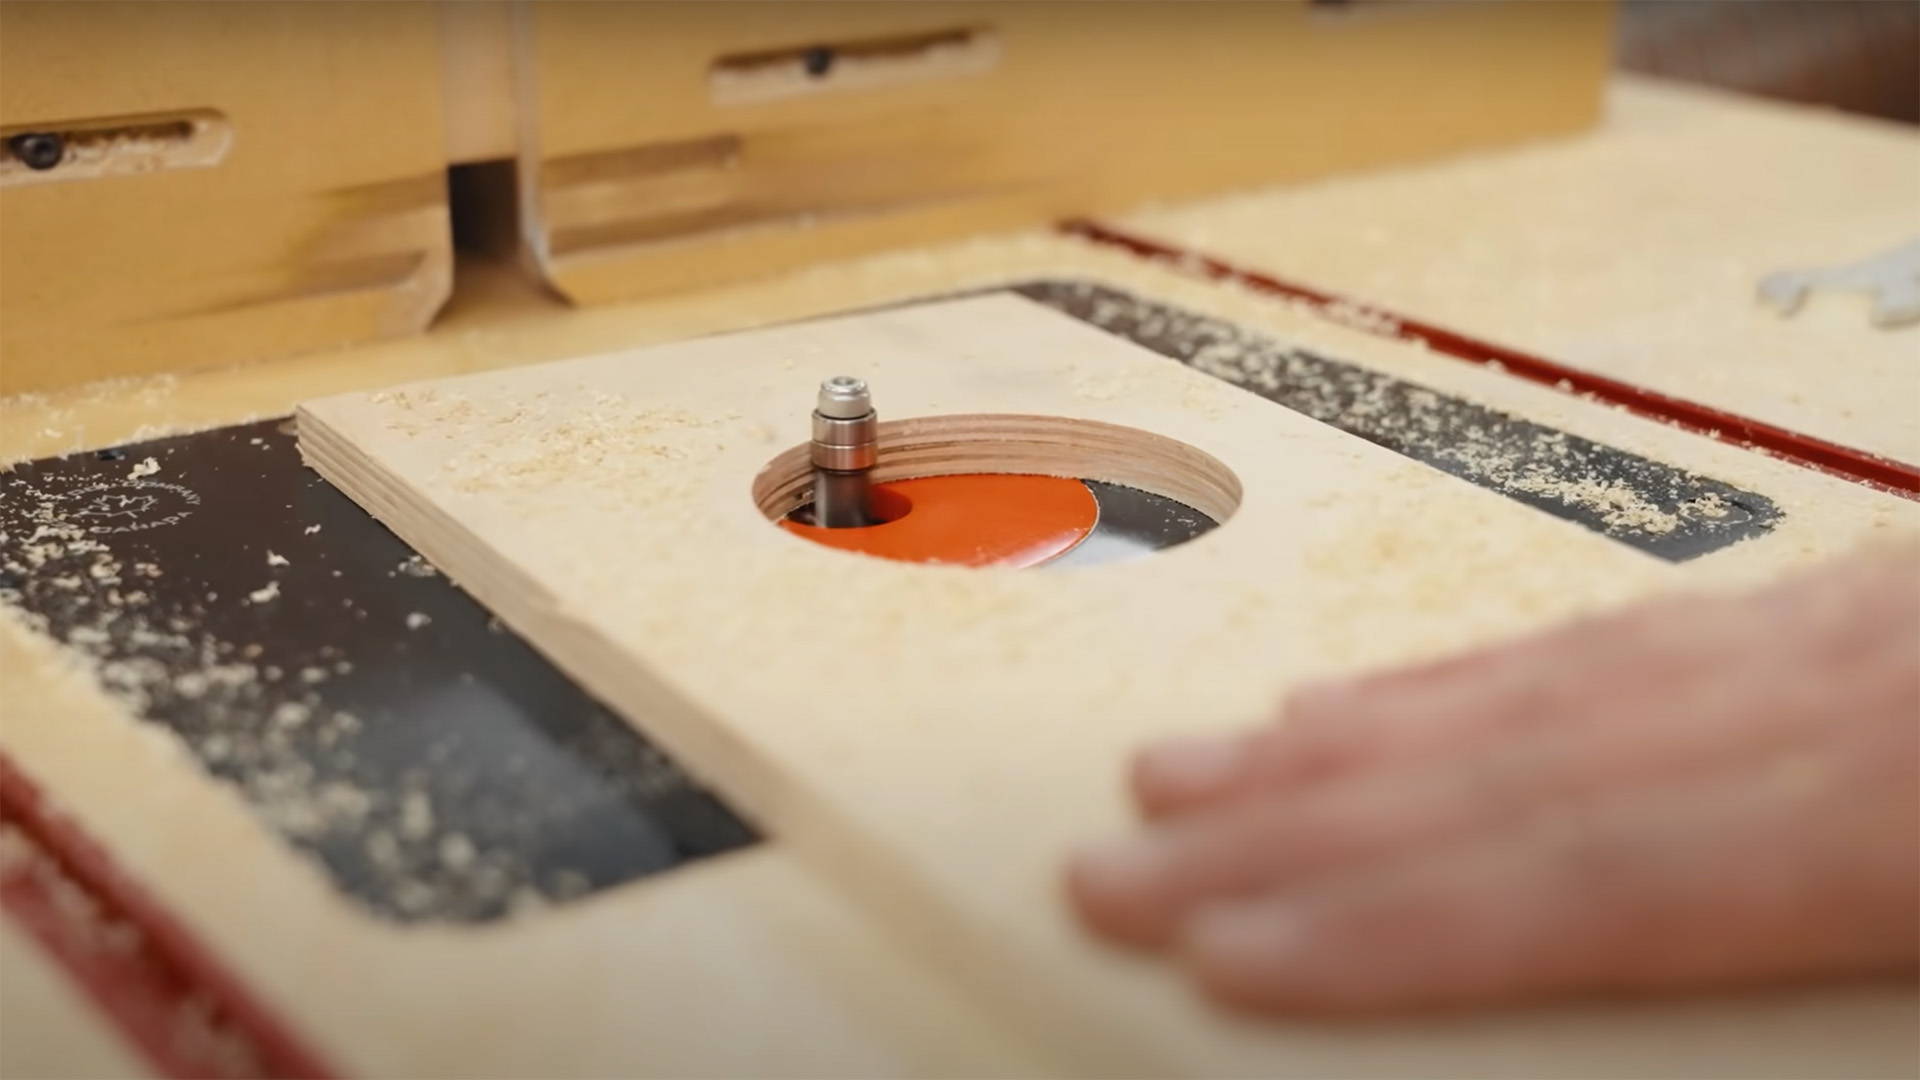 How to Re-Drill Holes Bigger: 2 Tricks to Expand Holes (Quick Tip)